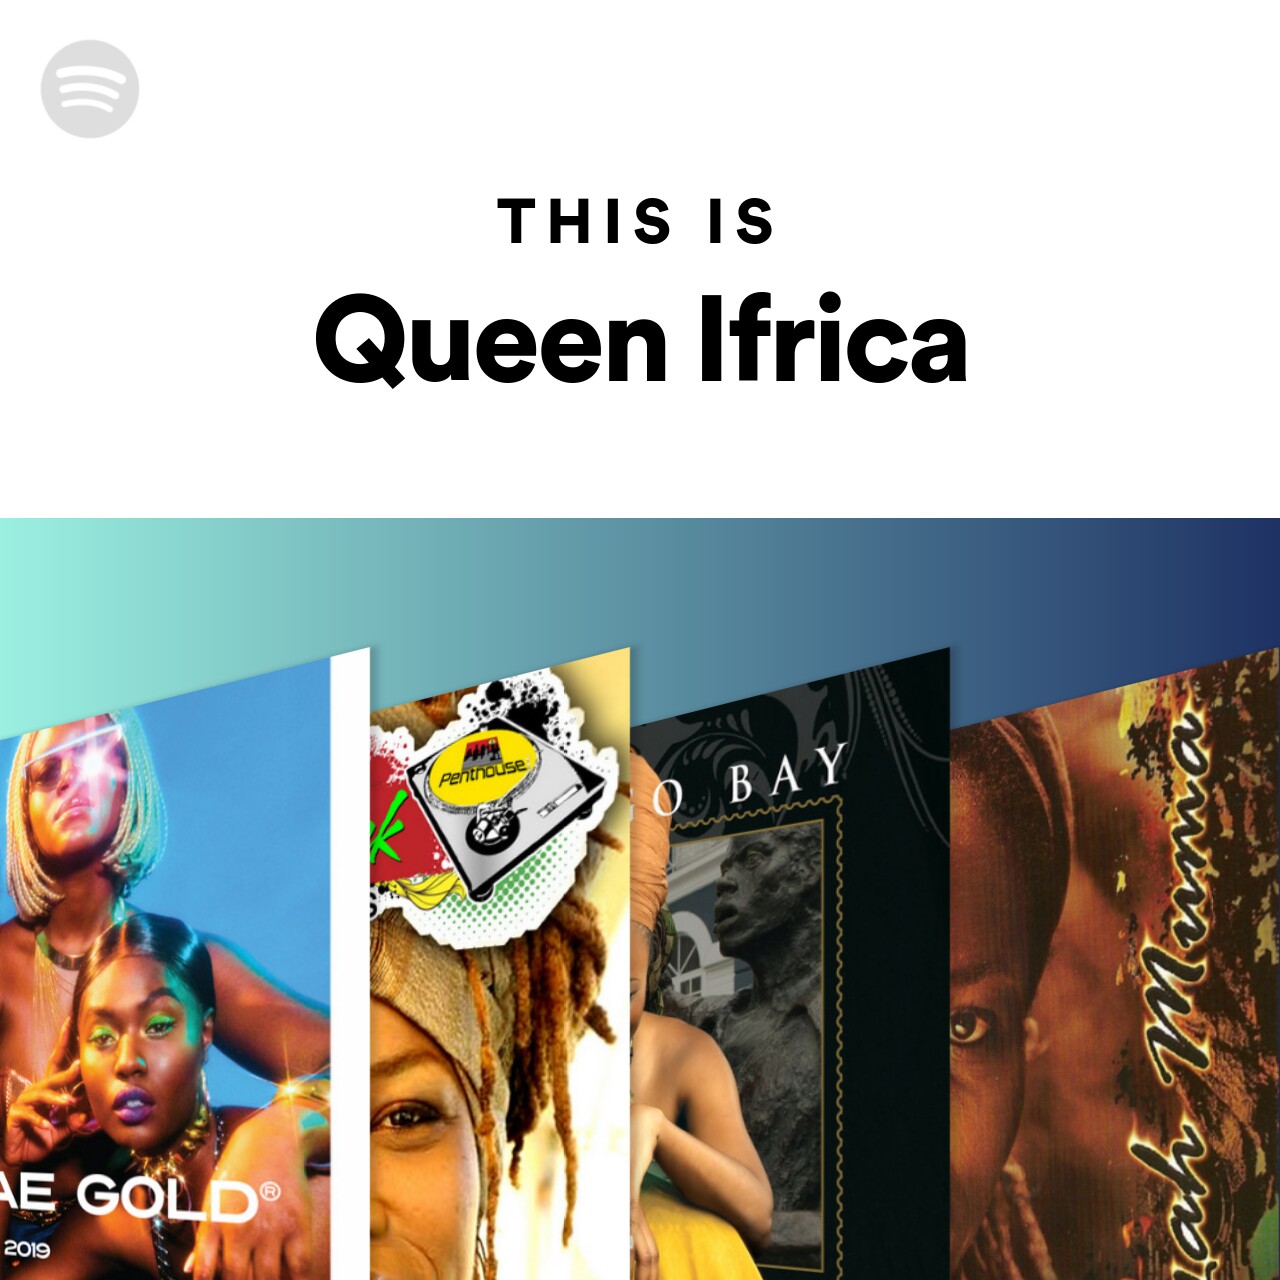 This Is Queen Ifrica